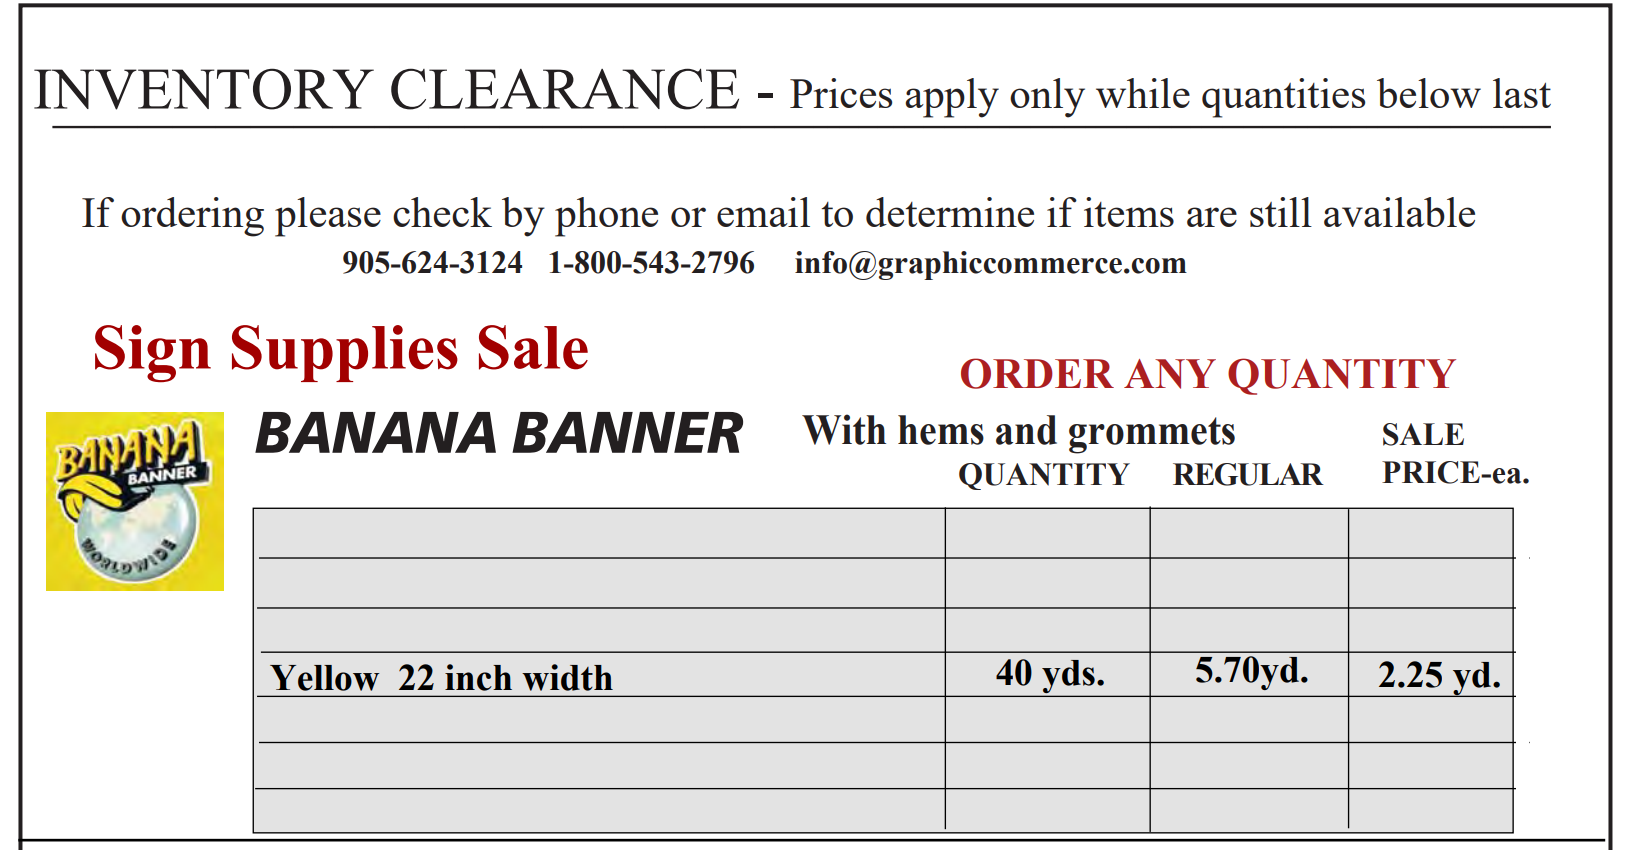 banana - INVENTORY CLEARANCE-Vinyl Banner Material